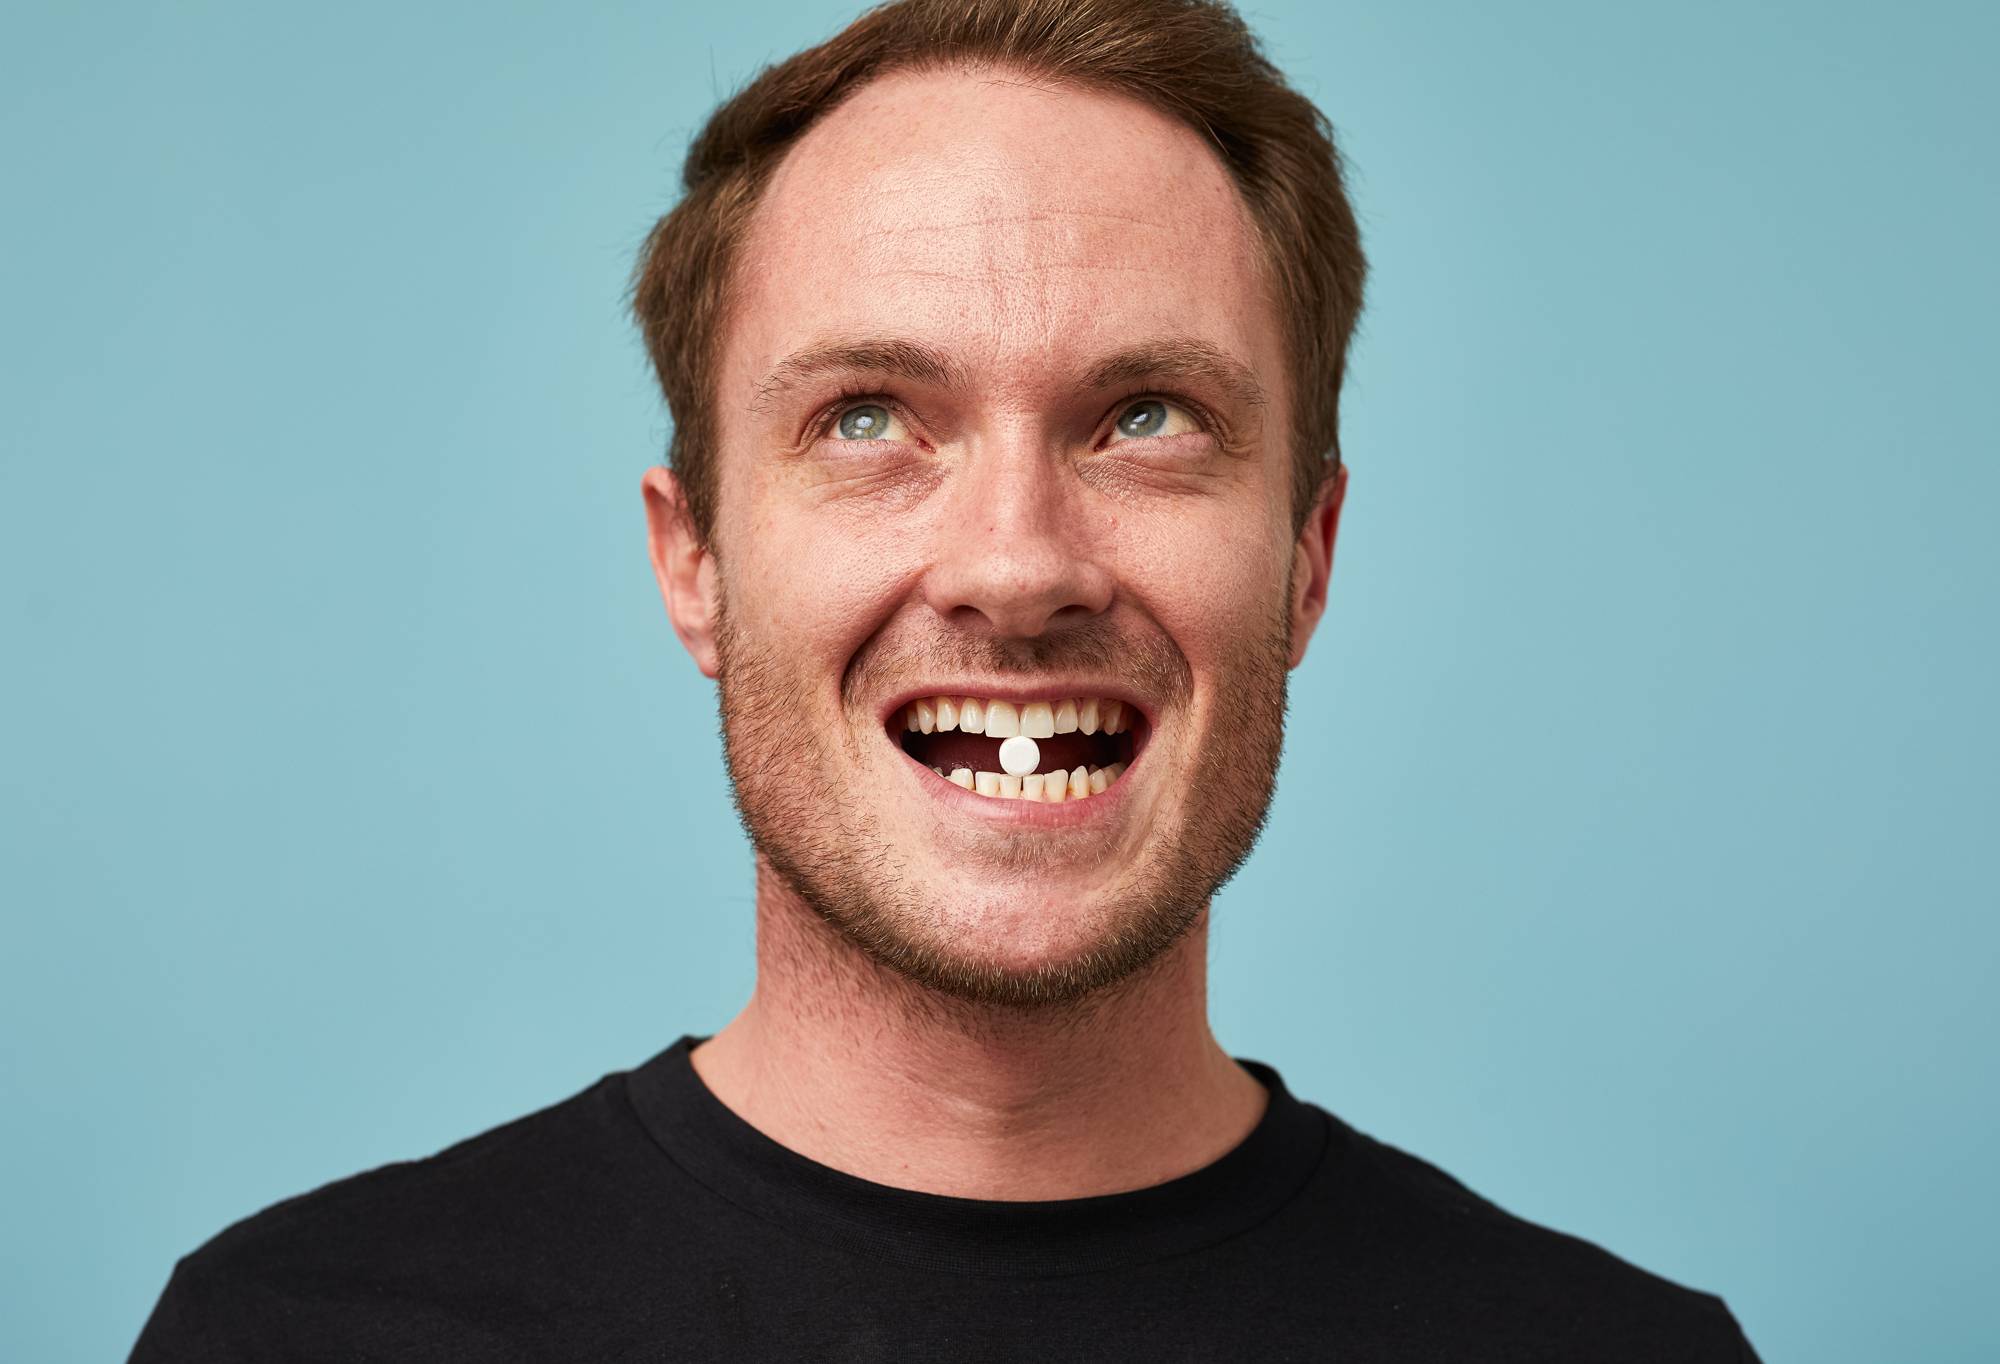 A person shows off their teeth and holds a small white Dirty toothpaste tab between their front teeth.